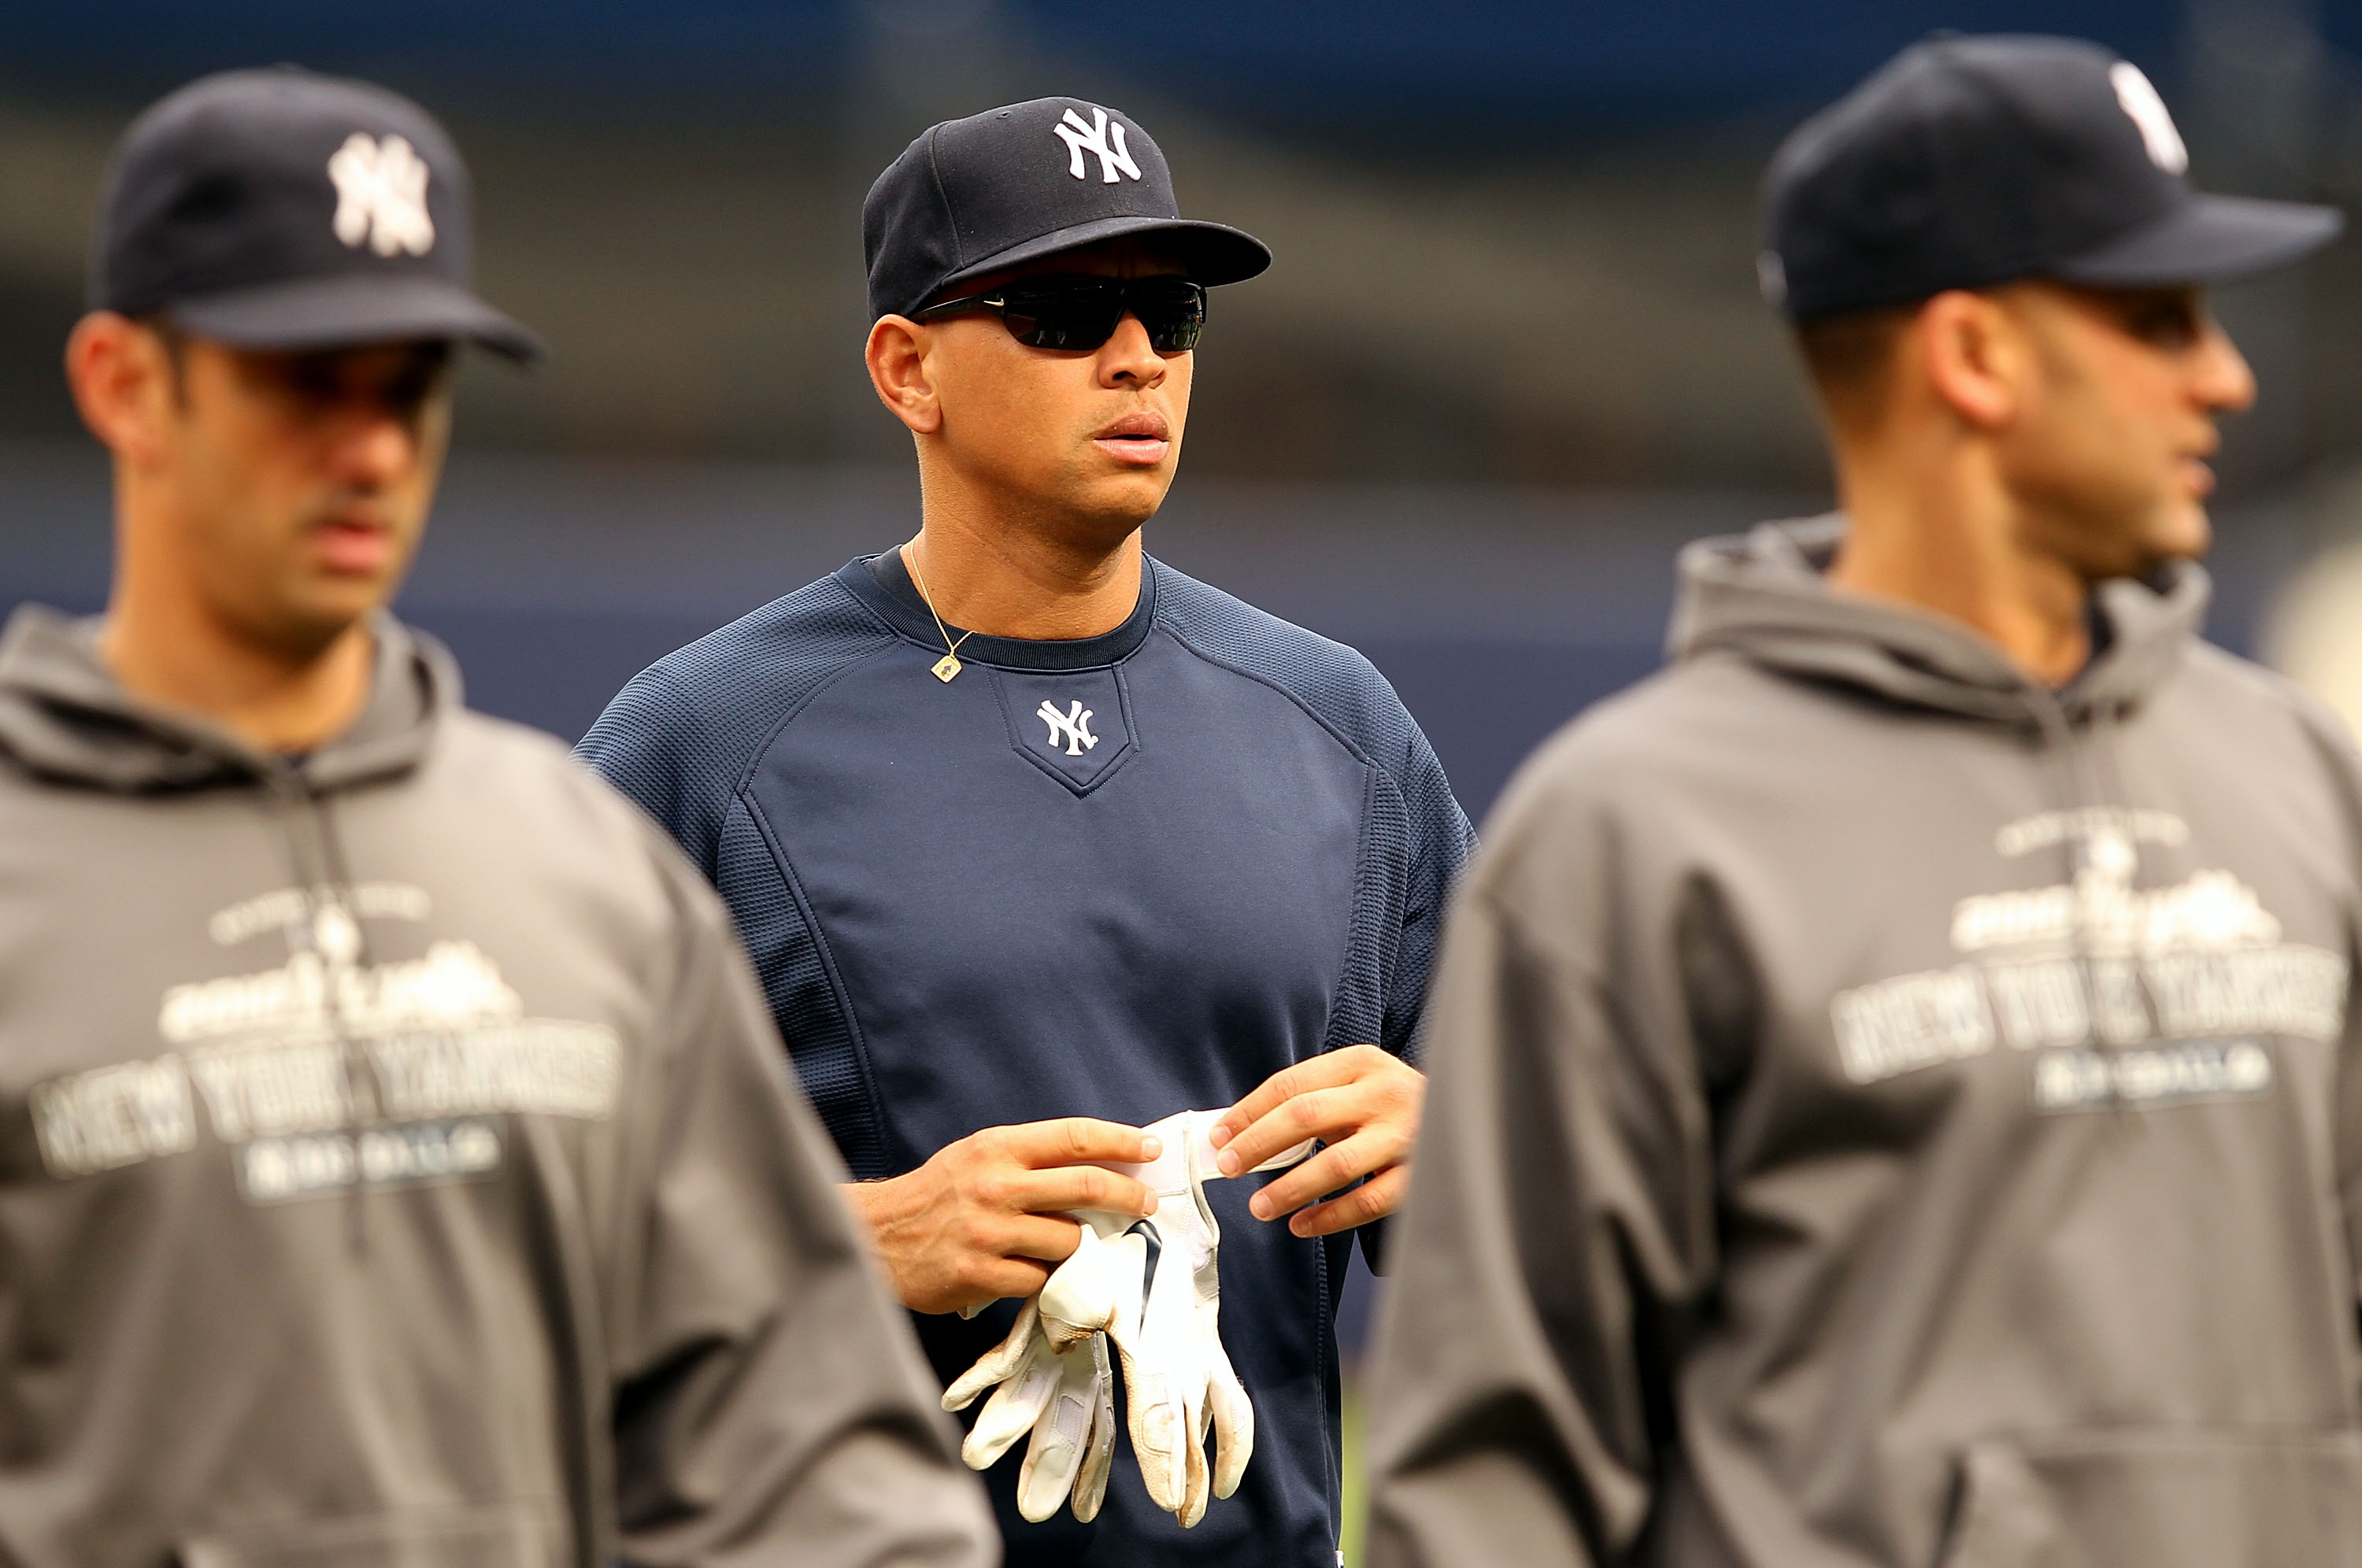 NEW YORK - OCTOBER 20:  Alex Rodriguez #13 of the New York Yankees walks on the field with Jorge Posada #20 (R) and Derek Jeter #2 during batting practice against the Texas Rangers in Game Five of the ALCS during the 2010 MLB Playoffs at Yankee Stadium on